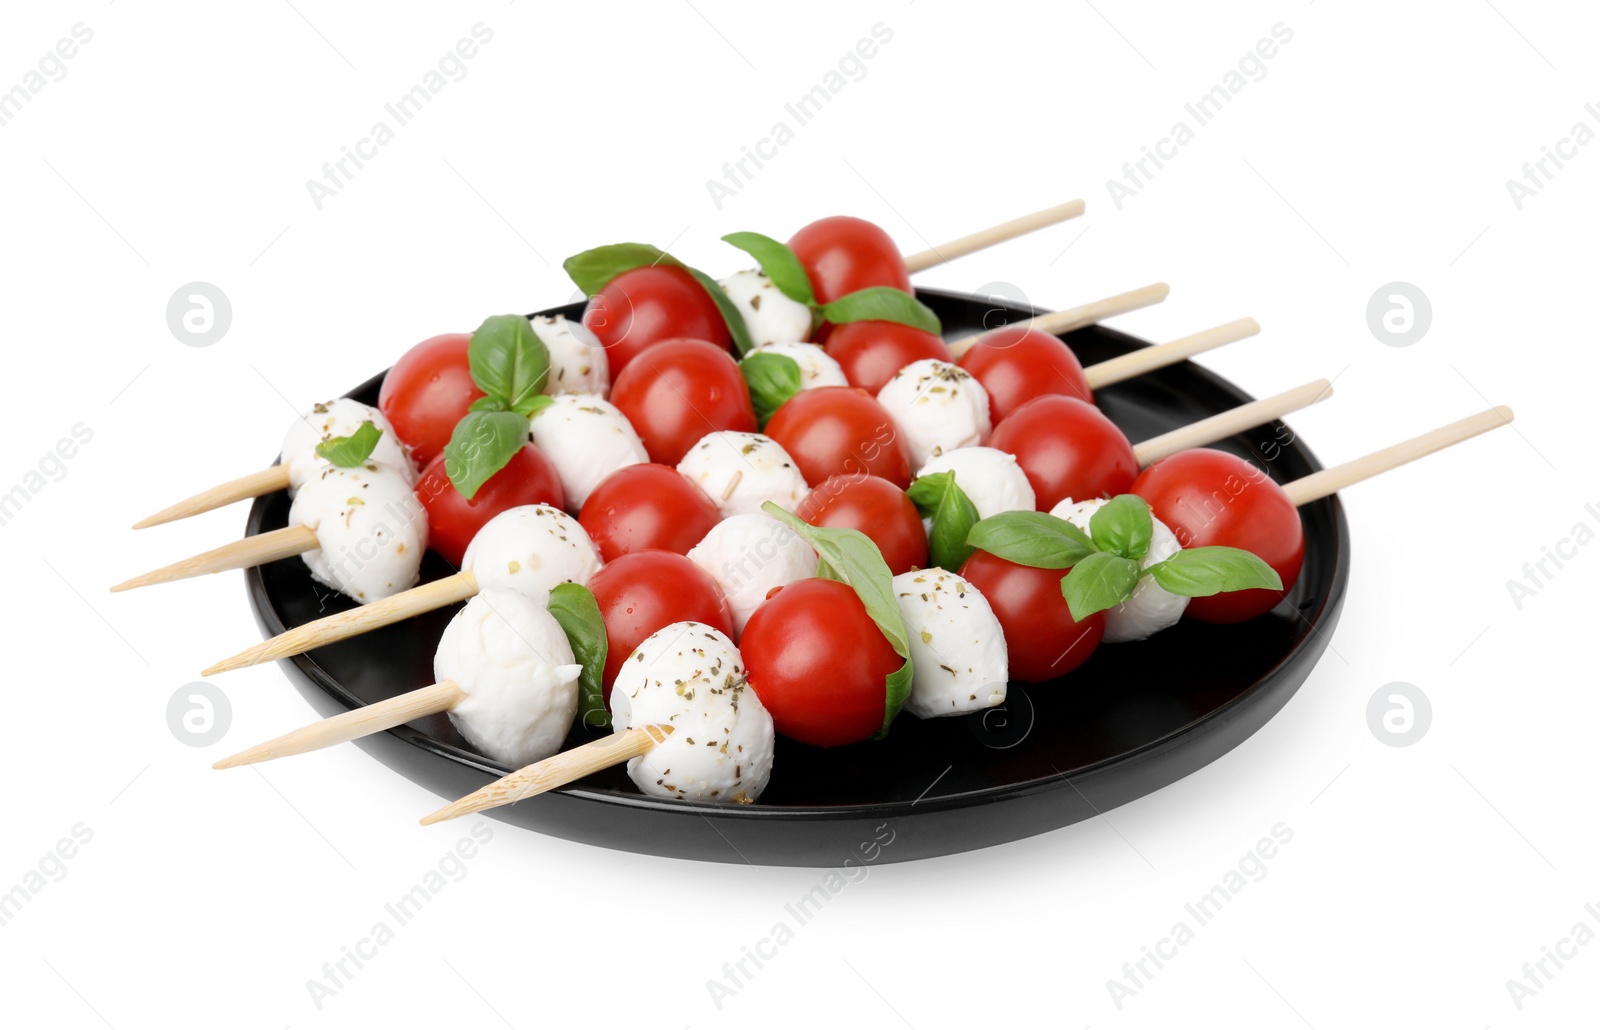 Photo of Plate of Caprese skewers with tomatoes, mozzarella balls, basil and spices isolated on white